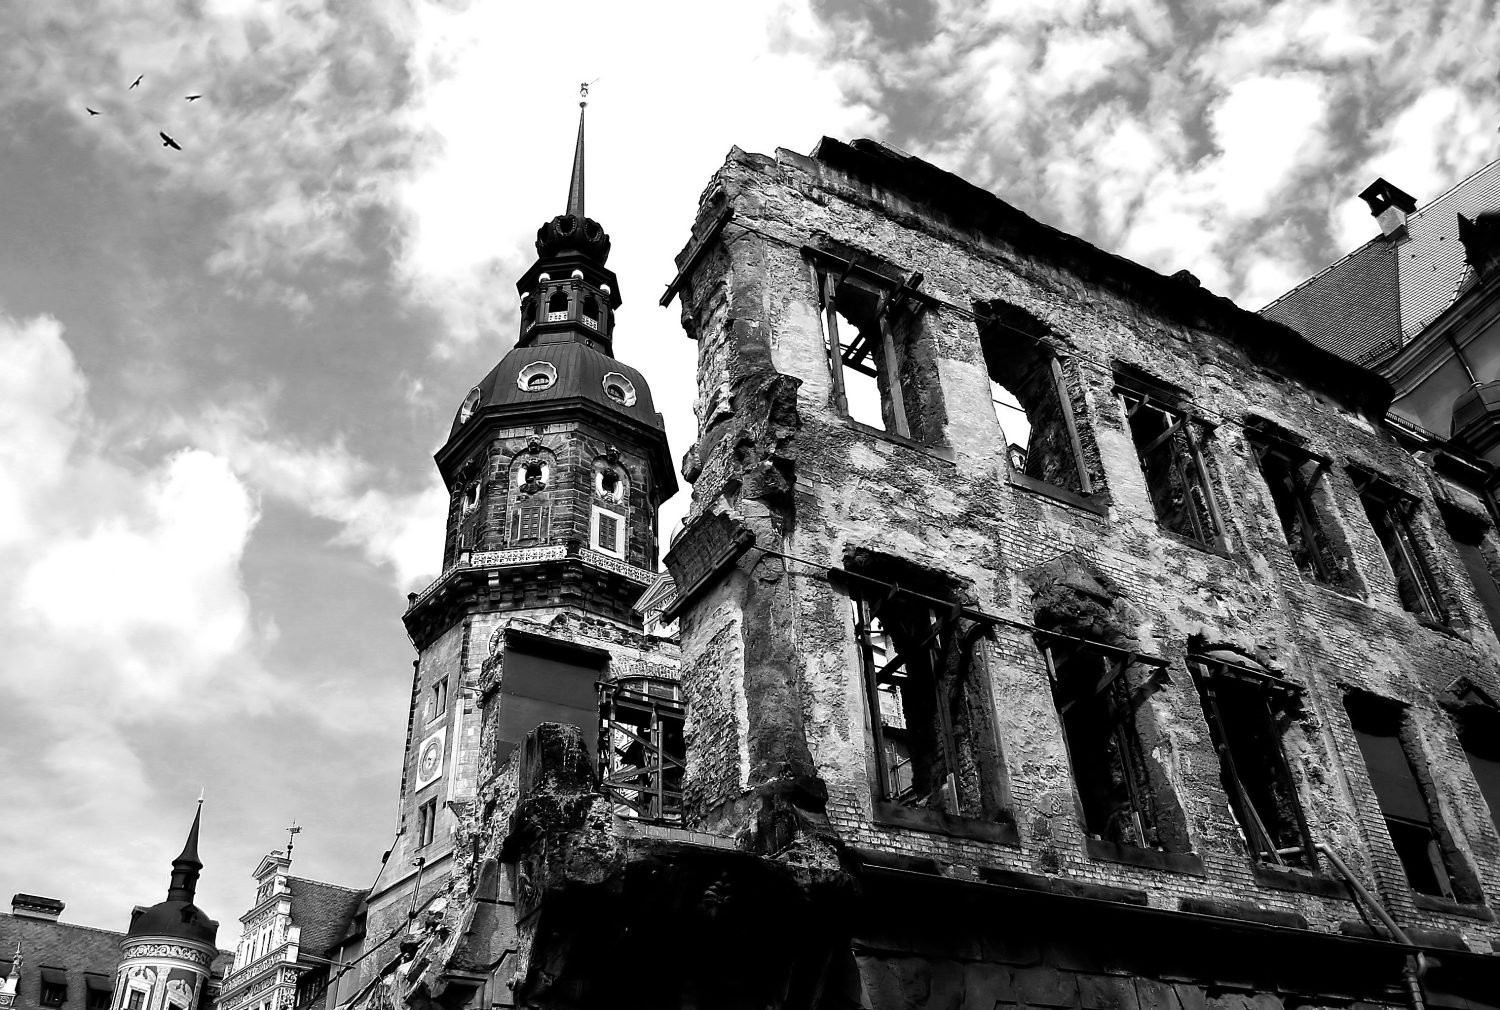 Building remains and ruins after World War II in Dresden, Germany.